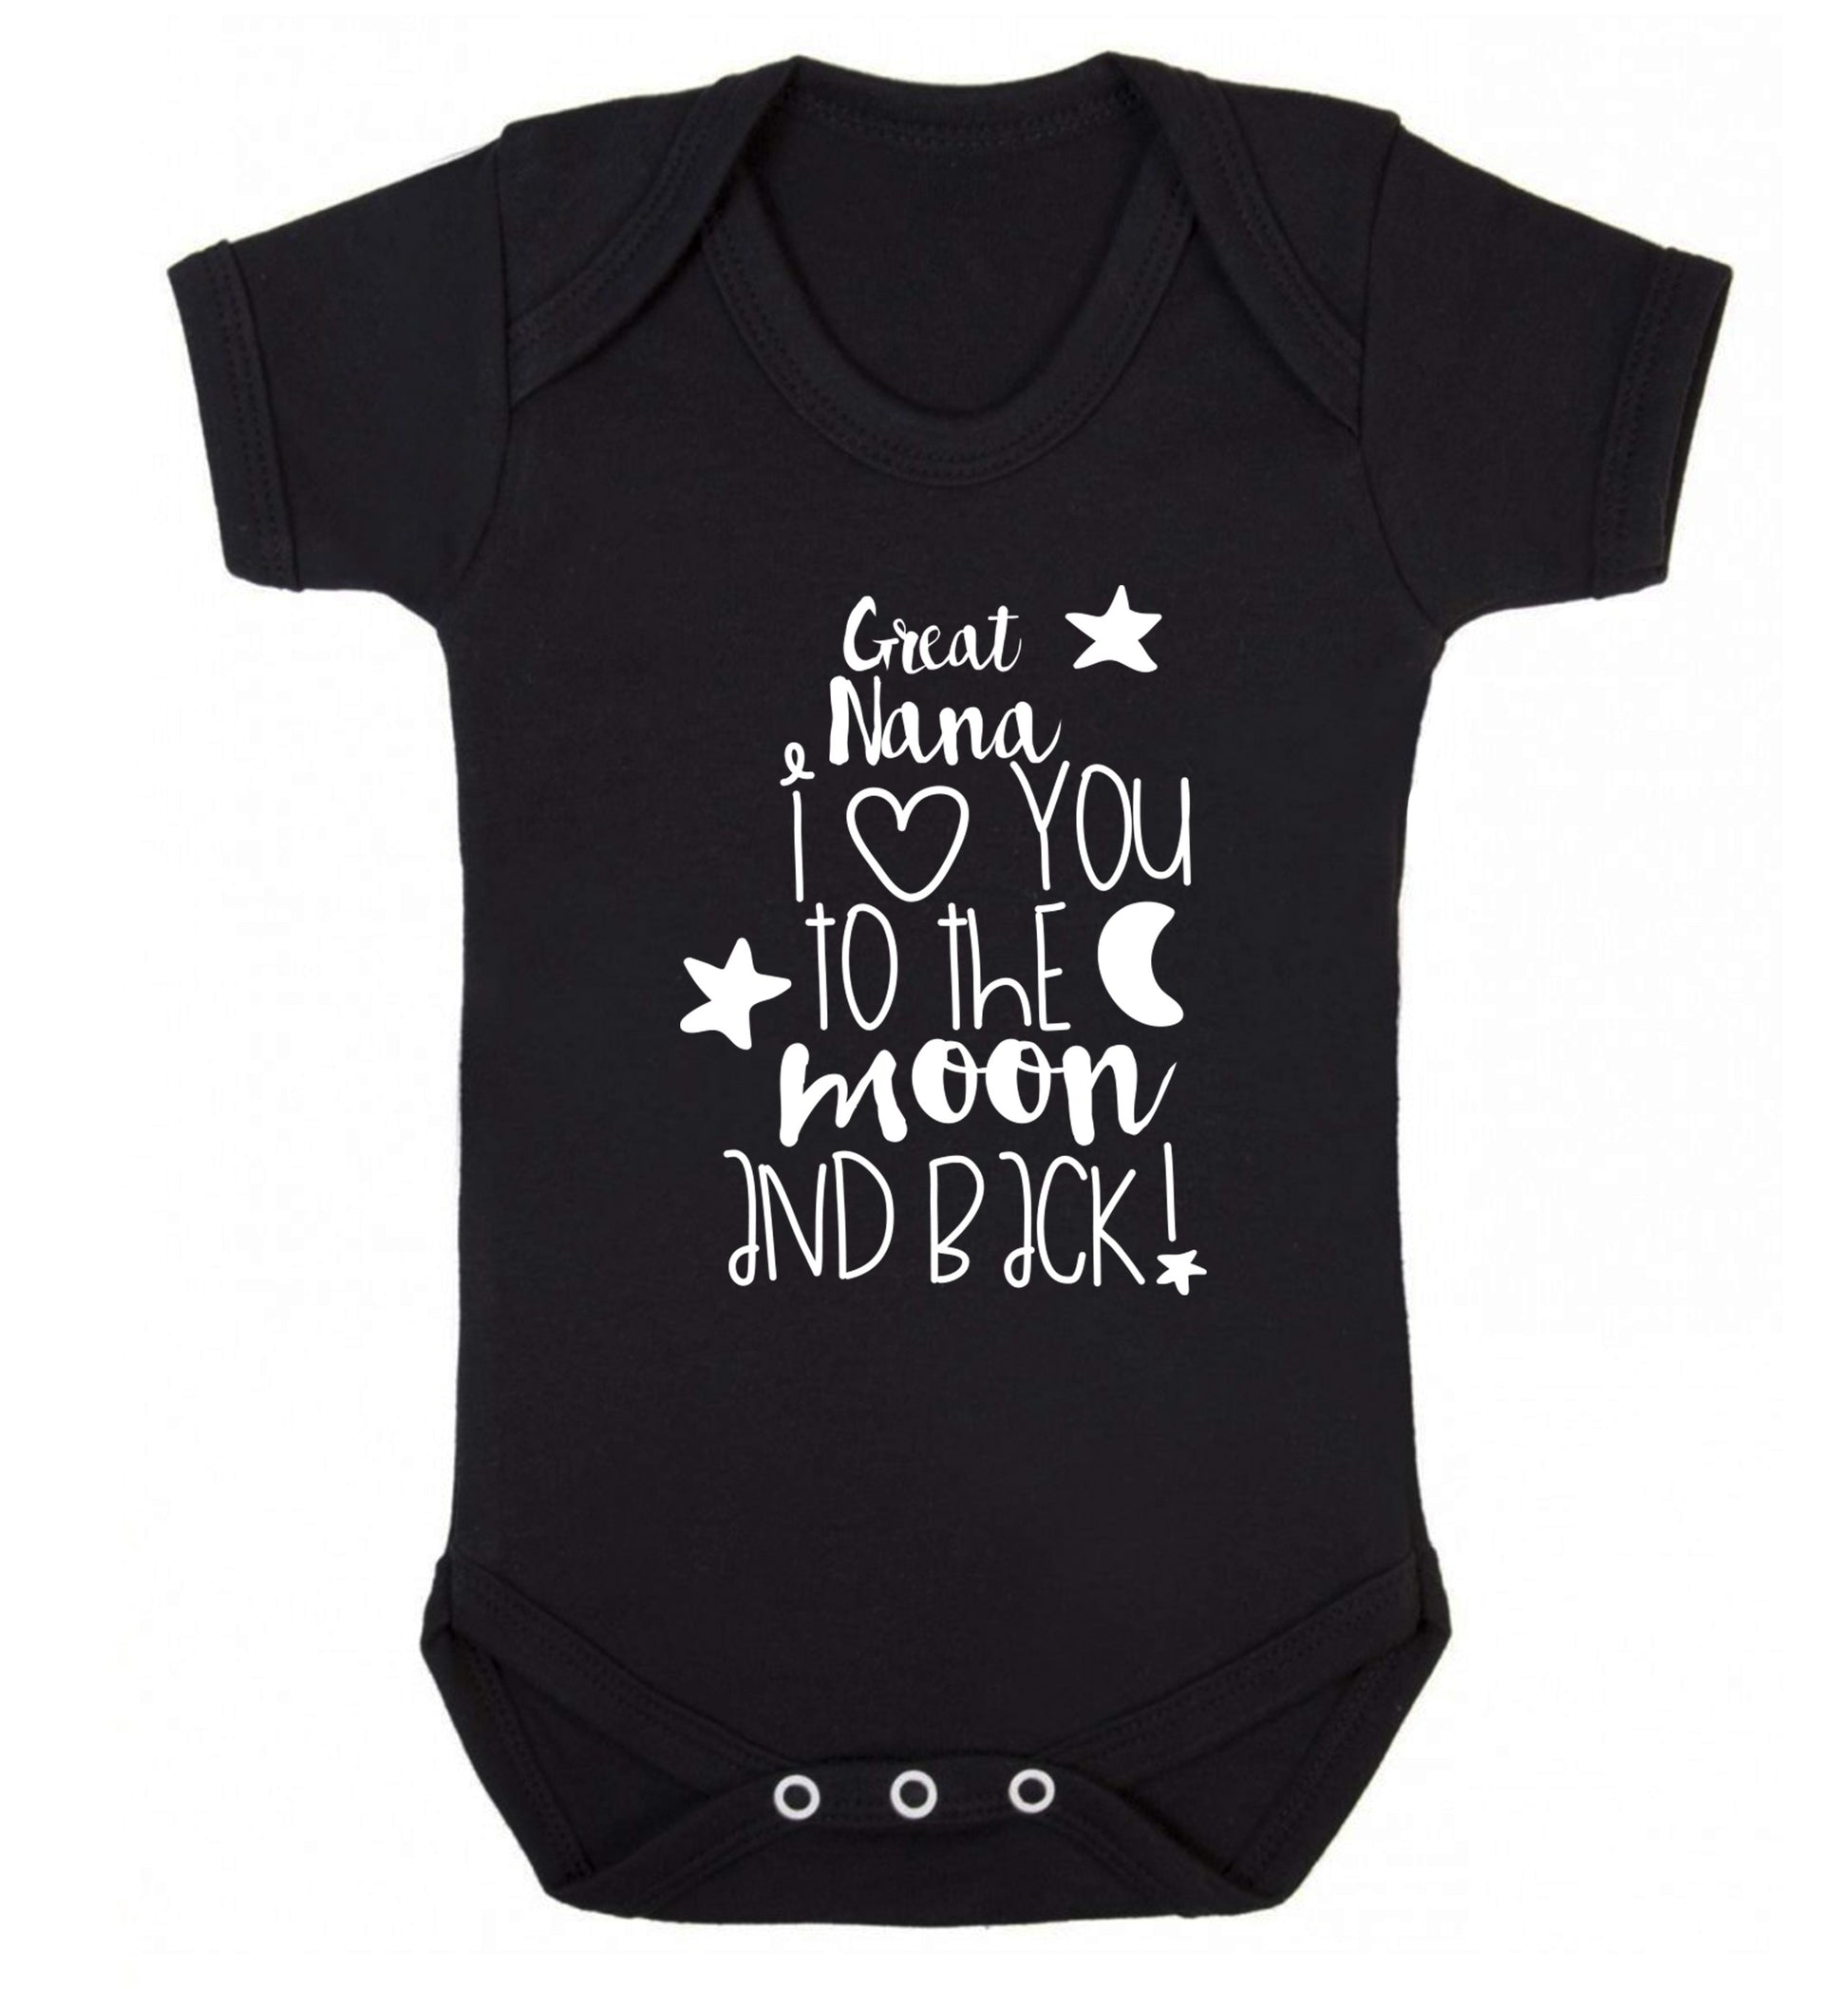 Great Nana I love you to the moon and back Baby Vest black 18-24 months